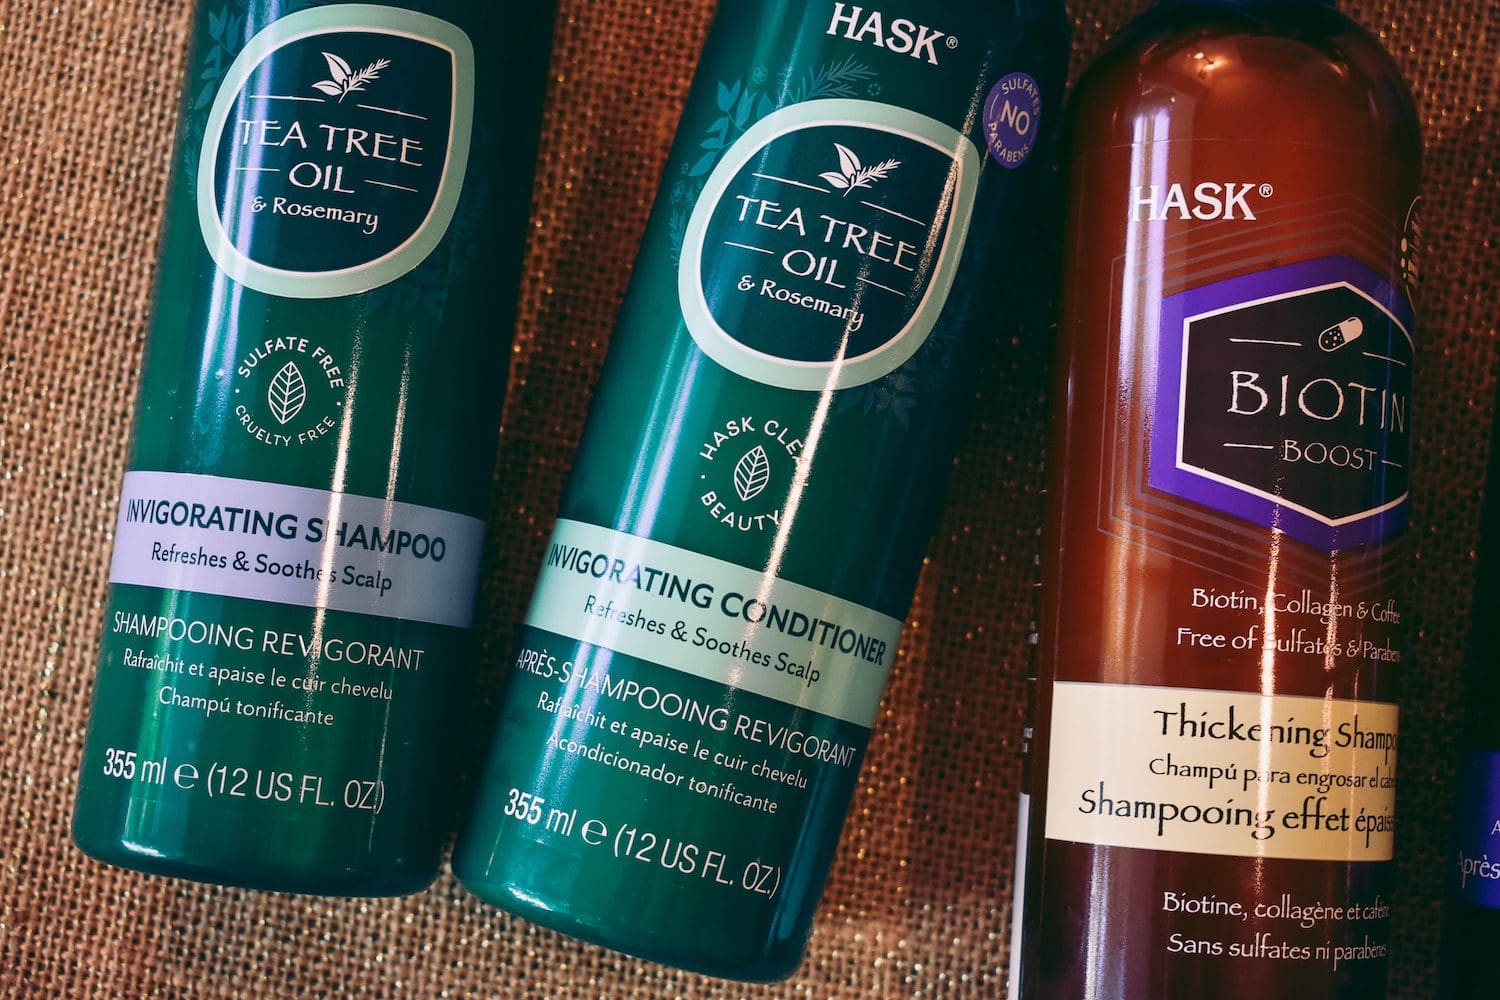 Product Review: Hask Hair Products to Try - Beauty Review